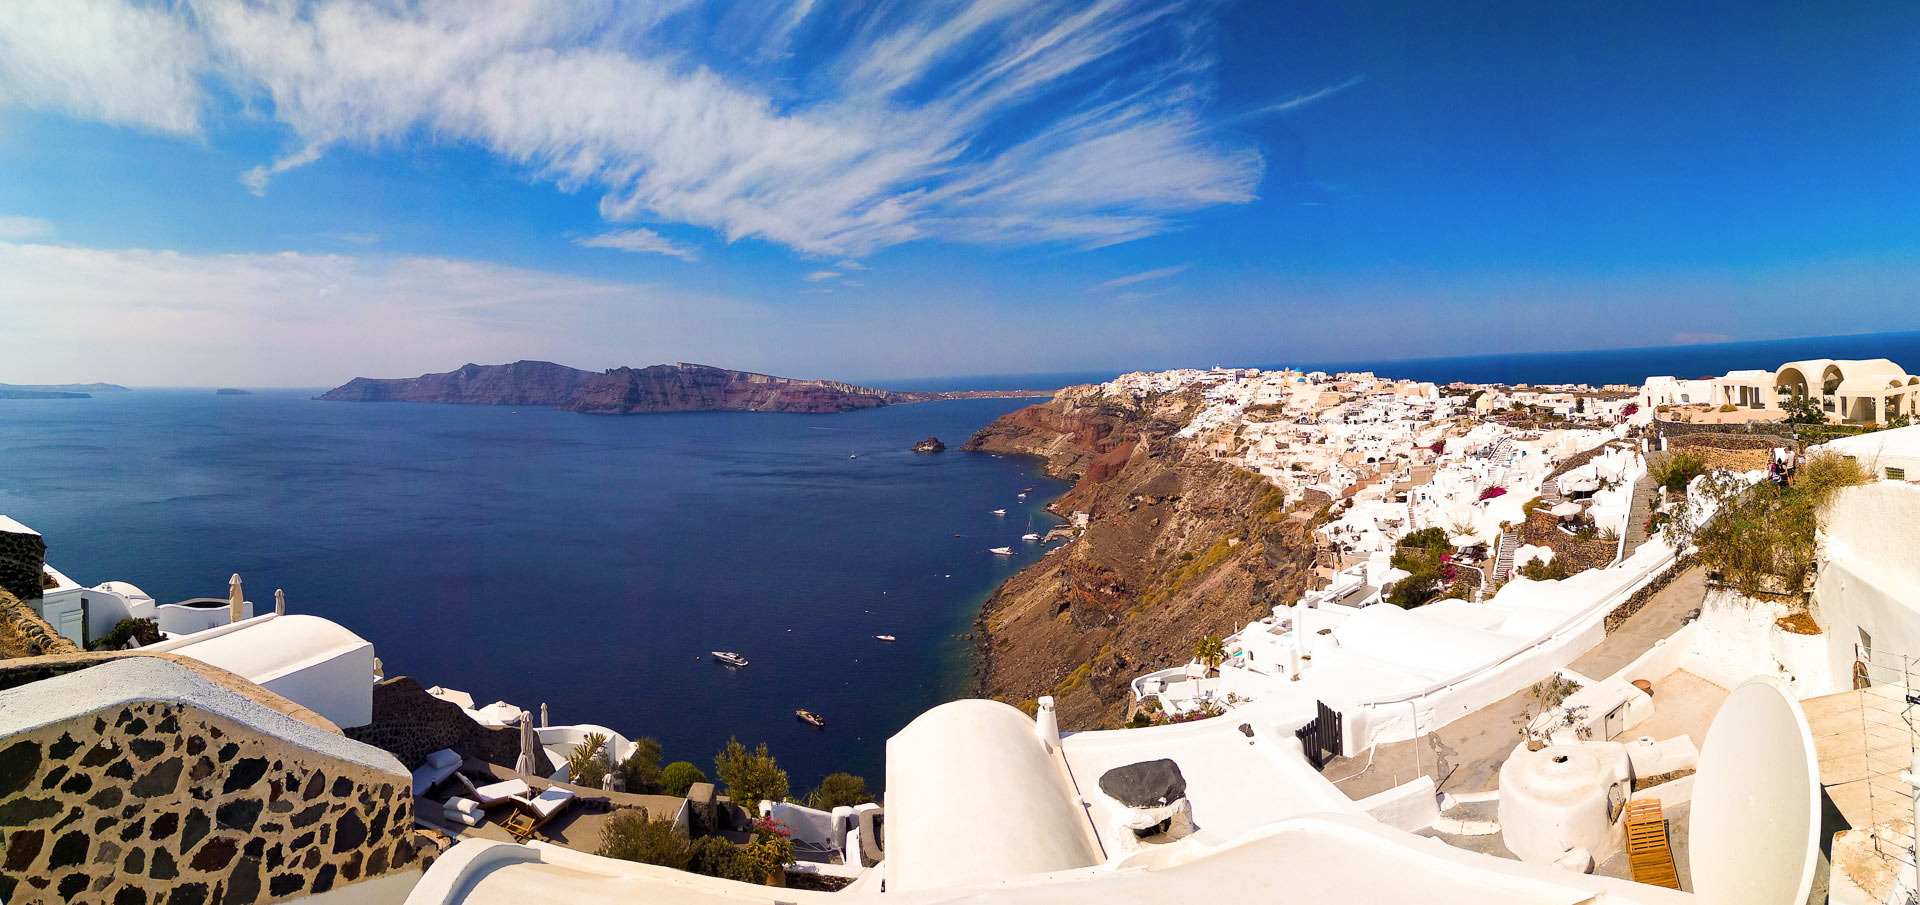 Santorini: 12 Best Things to Do and Must See Attractions ...